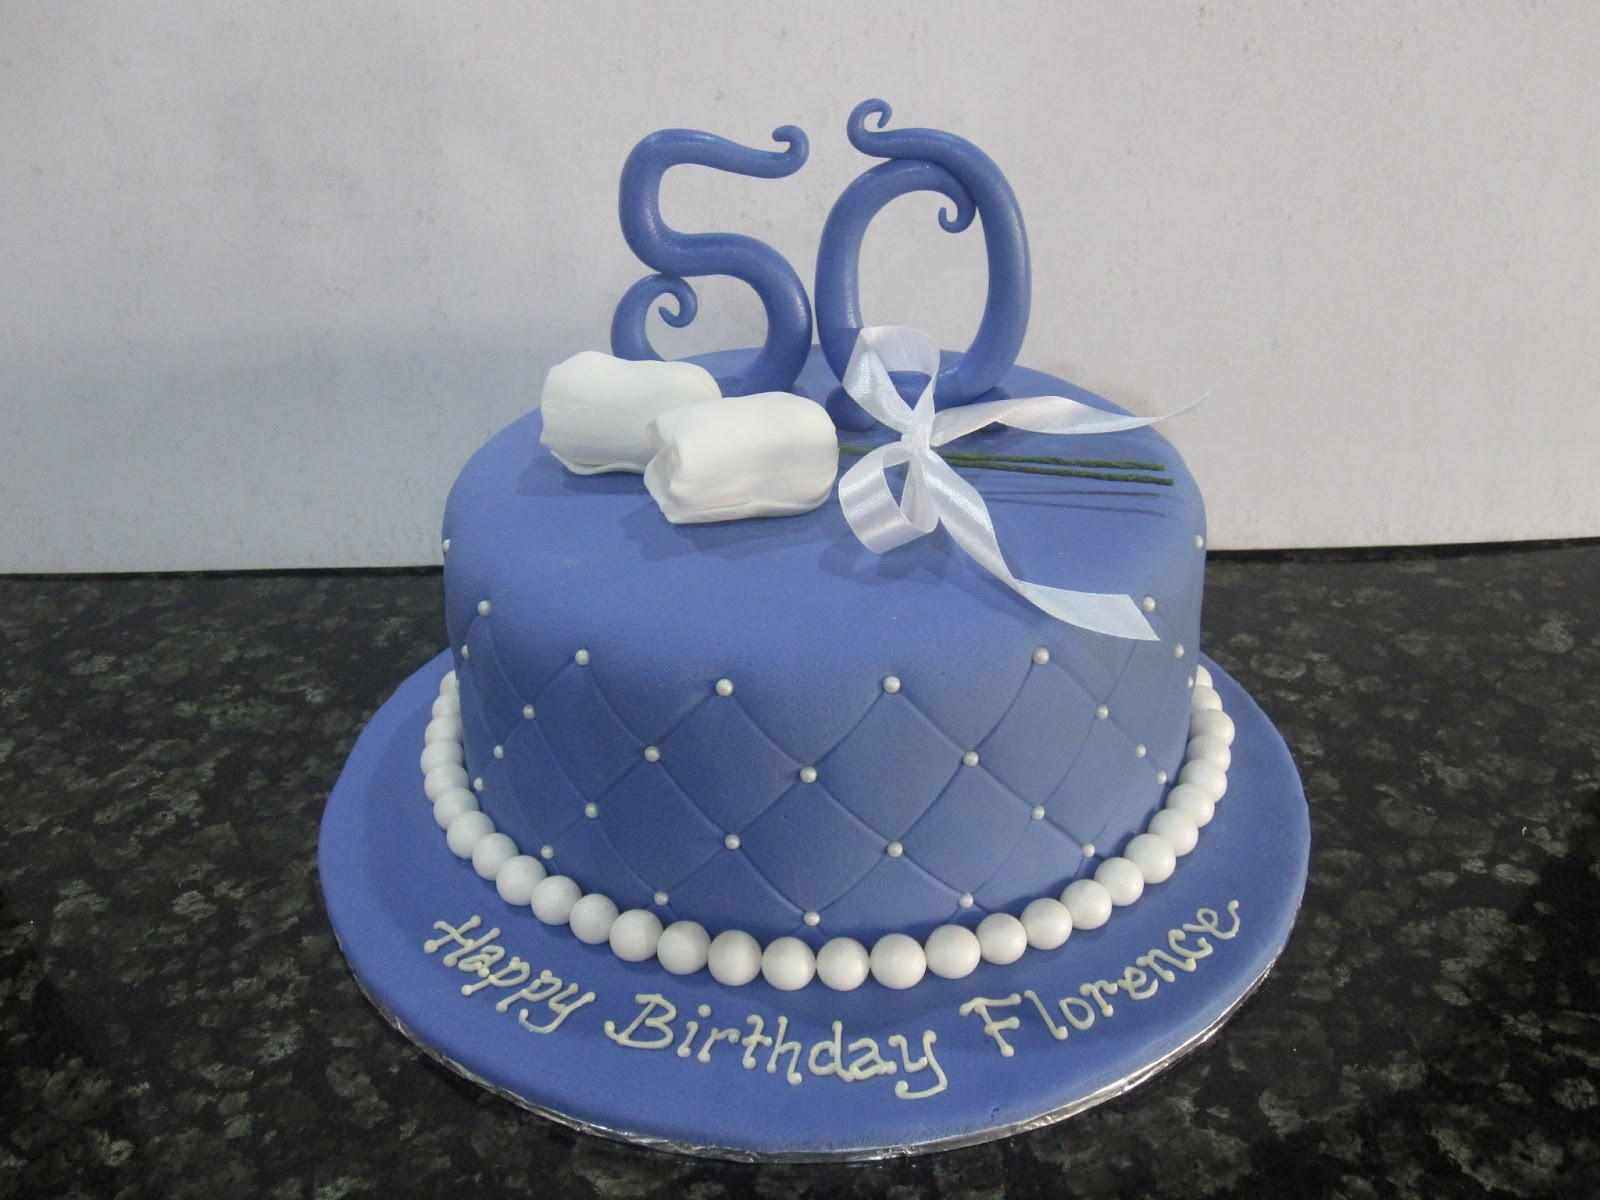 50th Birthday Cake Ideas For Her
 J s Cakes 50th Birthday